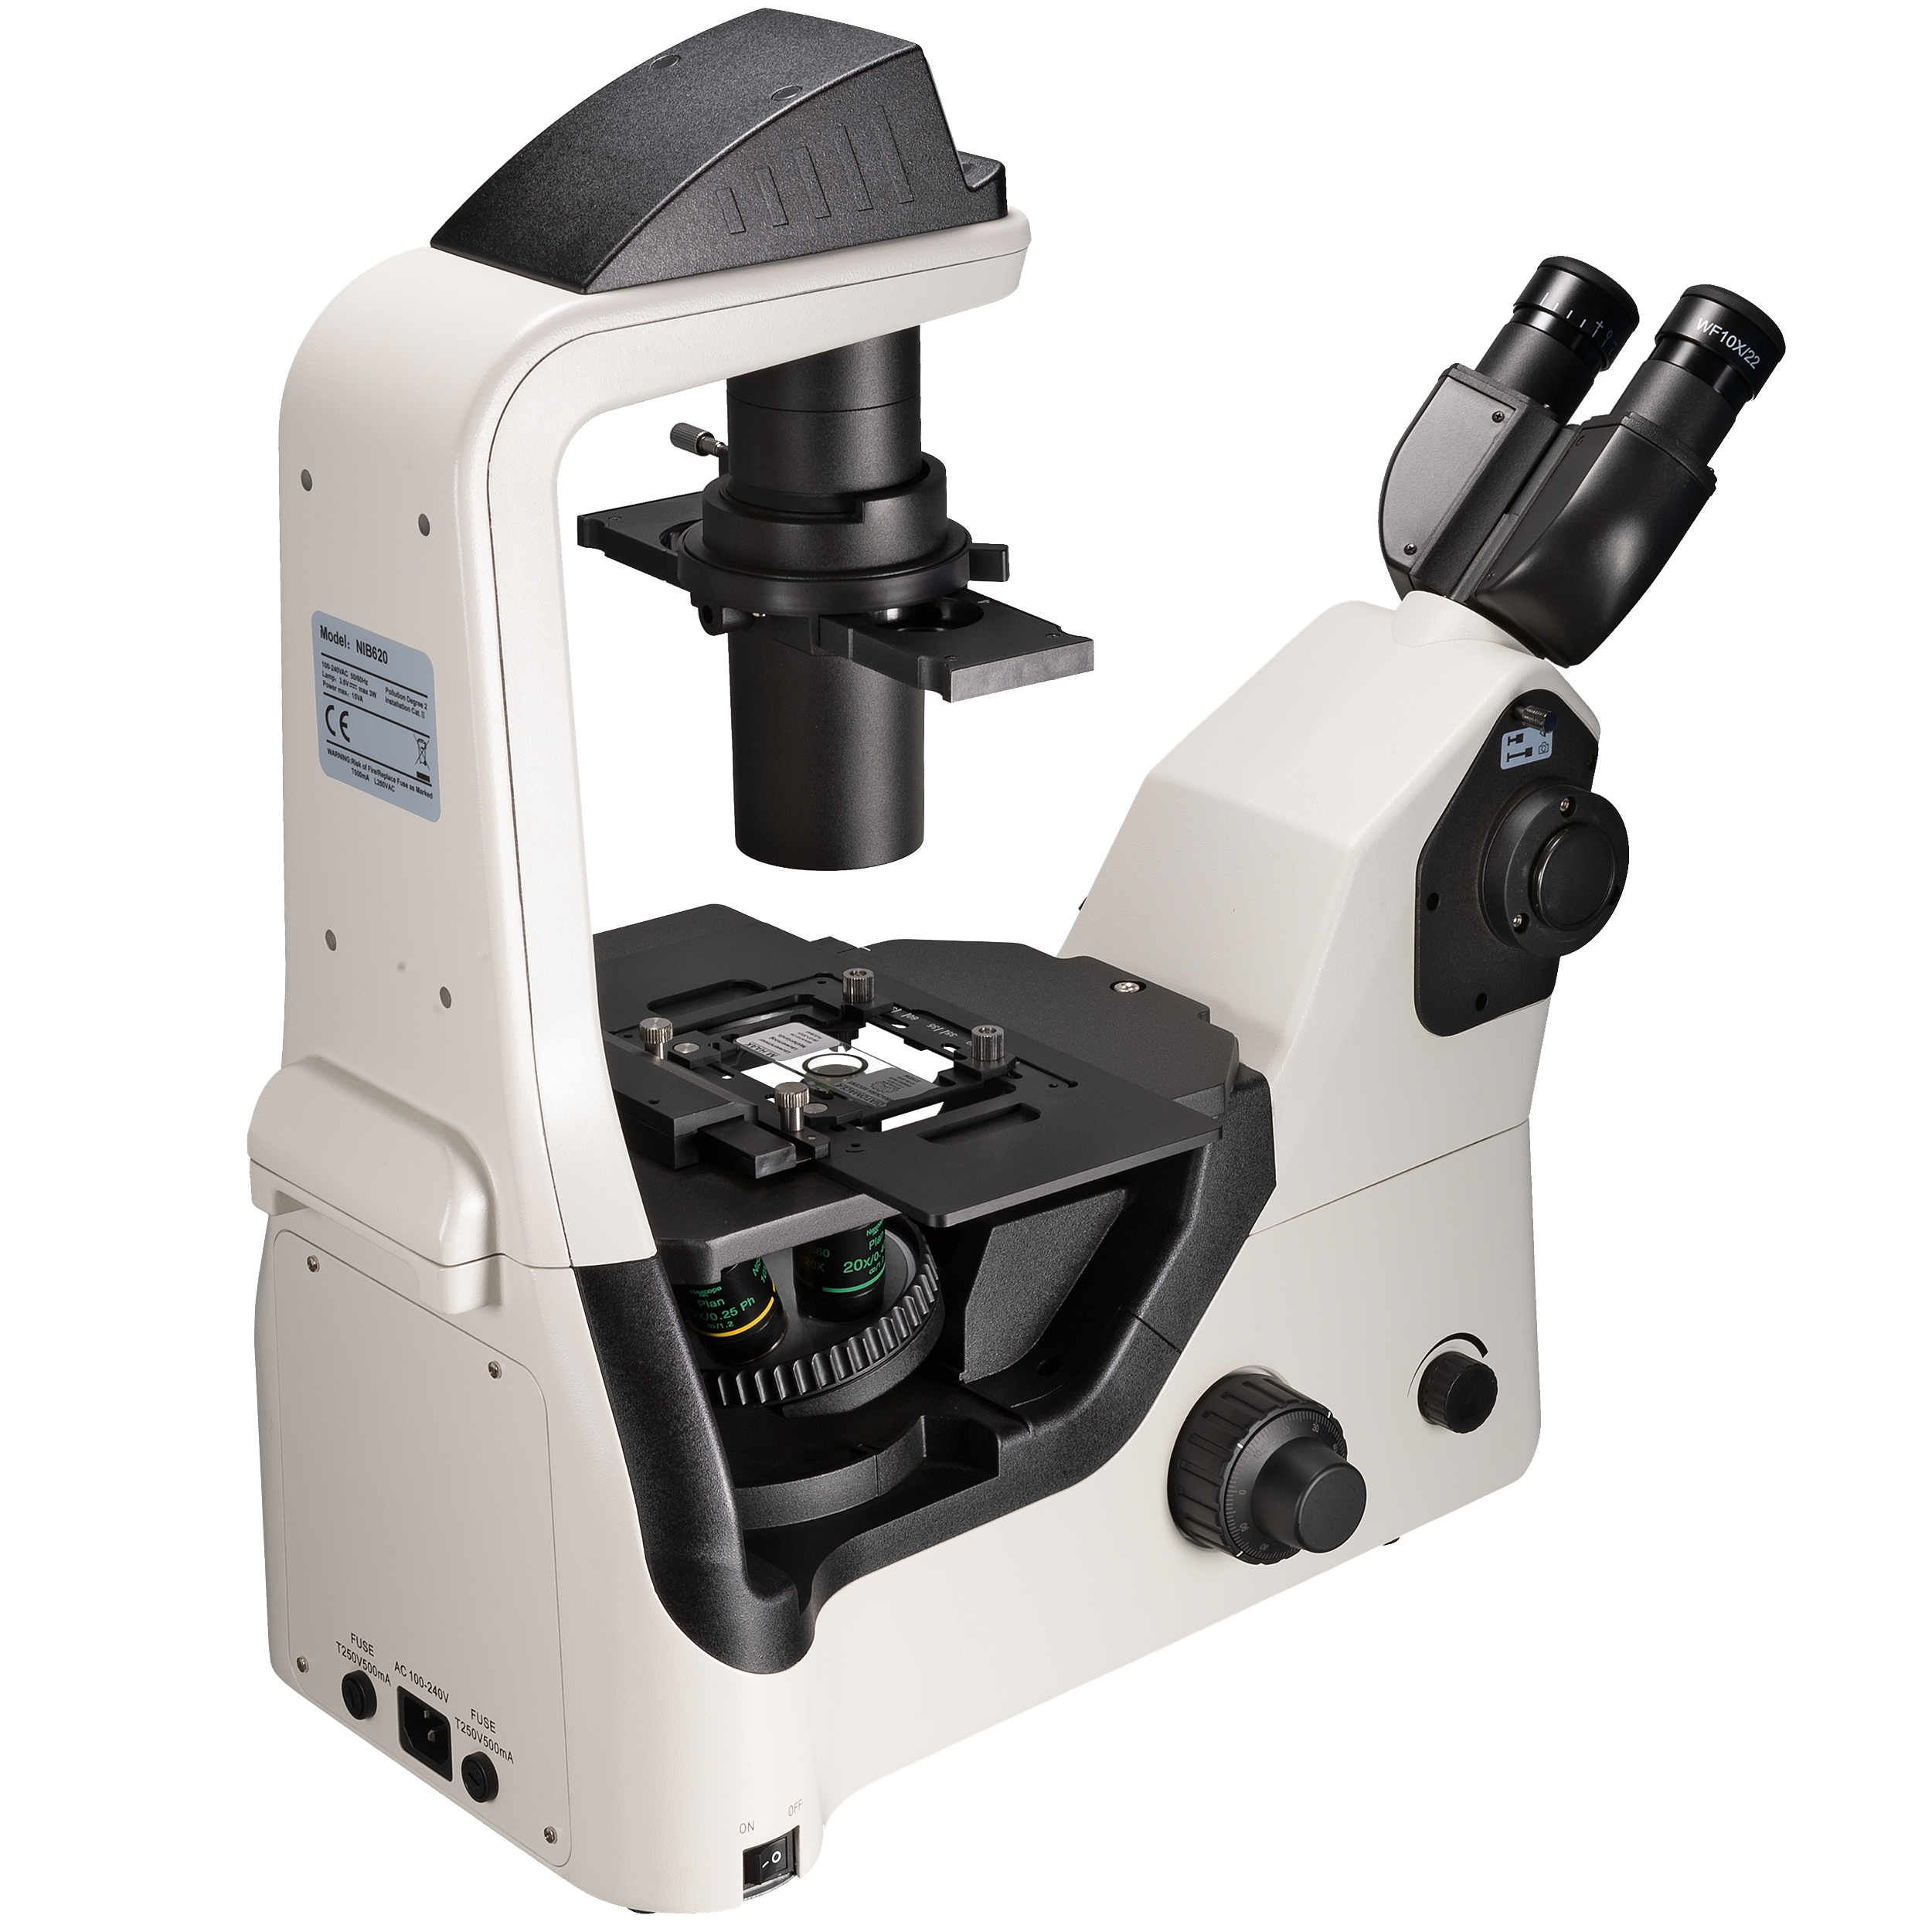 Nexcope NIB620 professional, inverted laboratory microscope with phase contrast